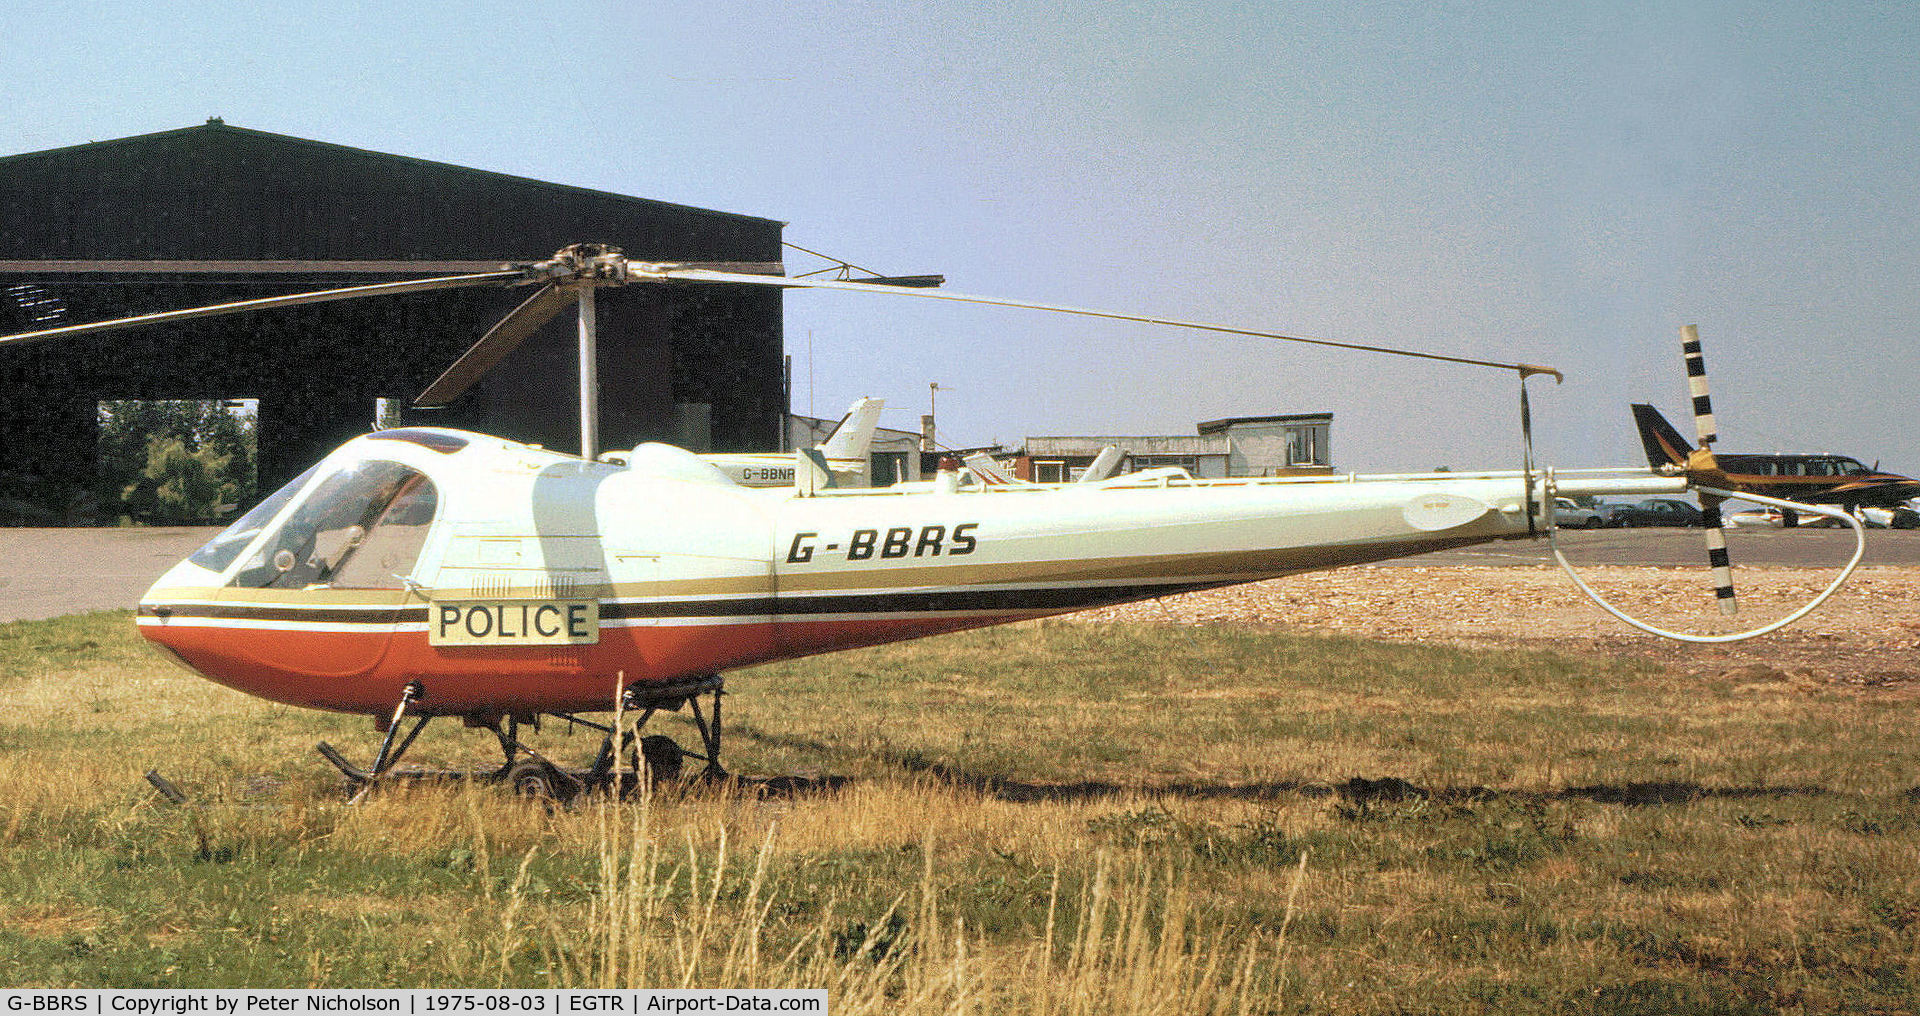 G-BBRS, 1974 Enstrom F-28A C/N 258, Enstrom F-28A as seen at Elstree in the Summer of 1975.